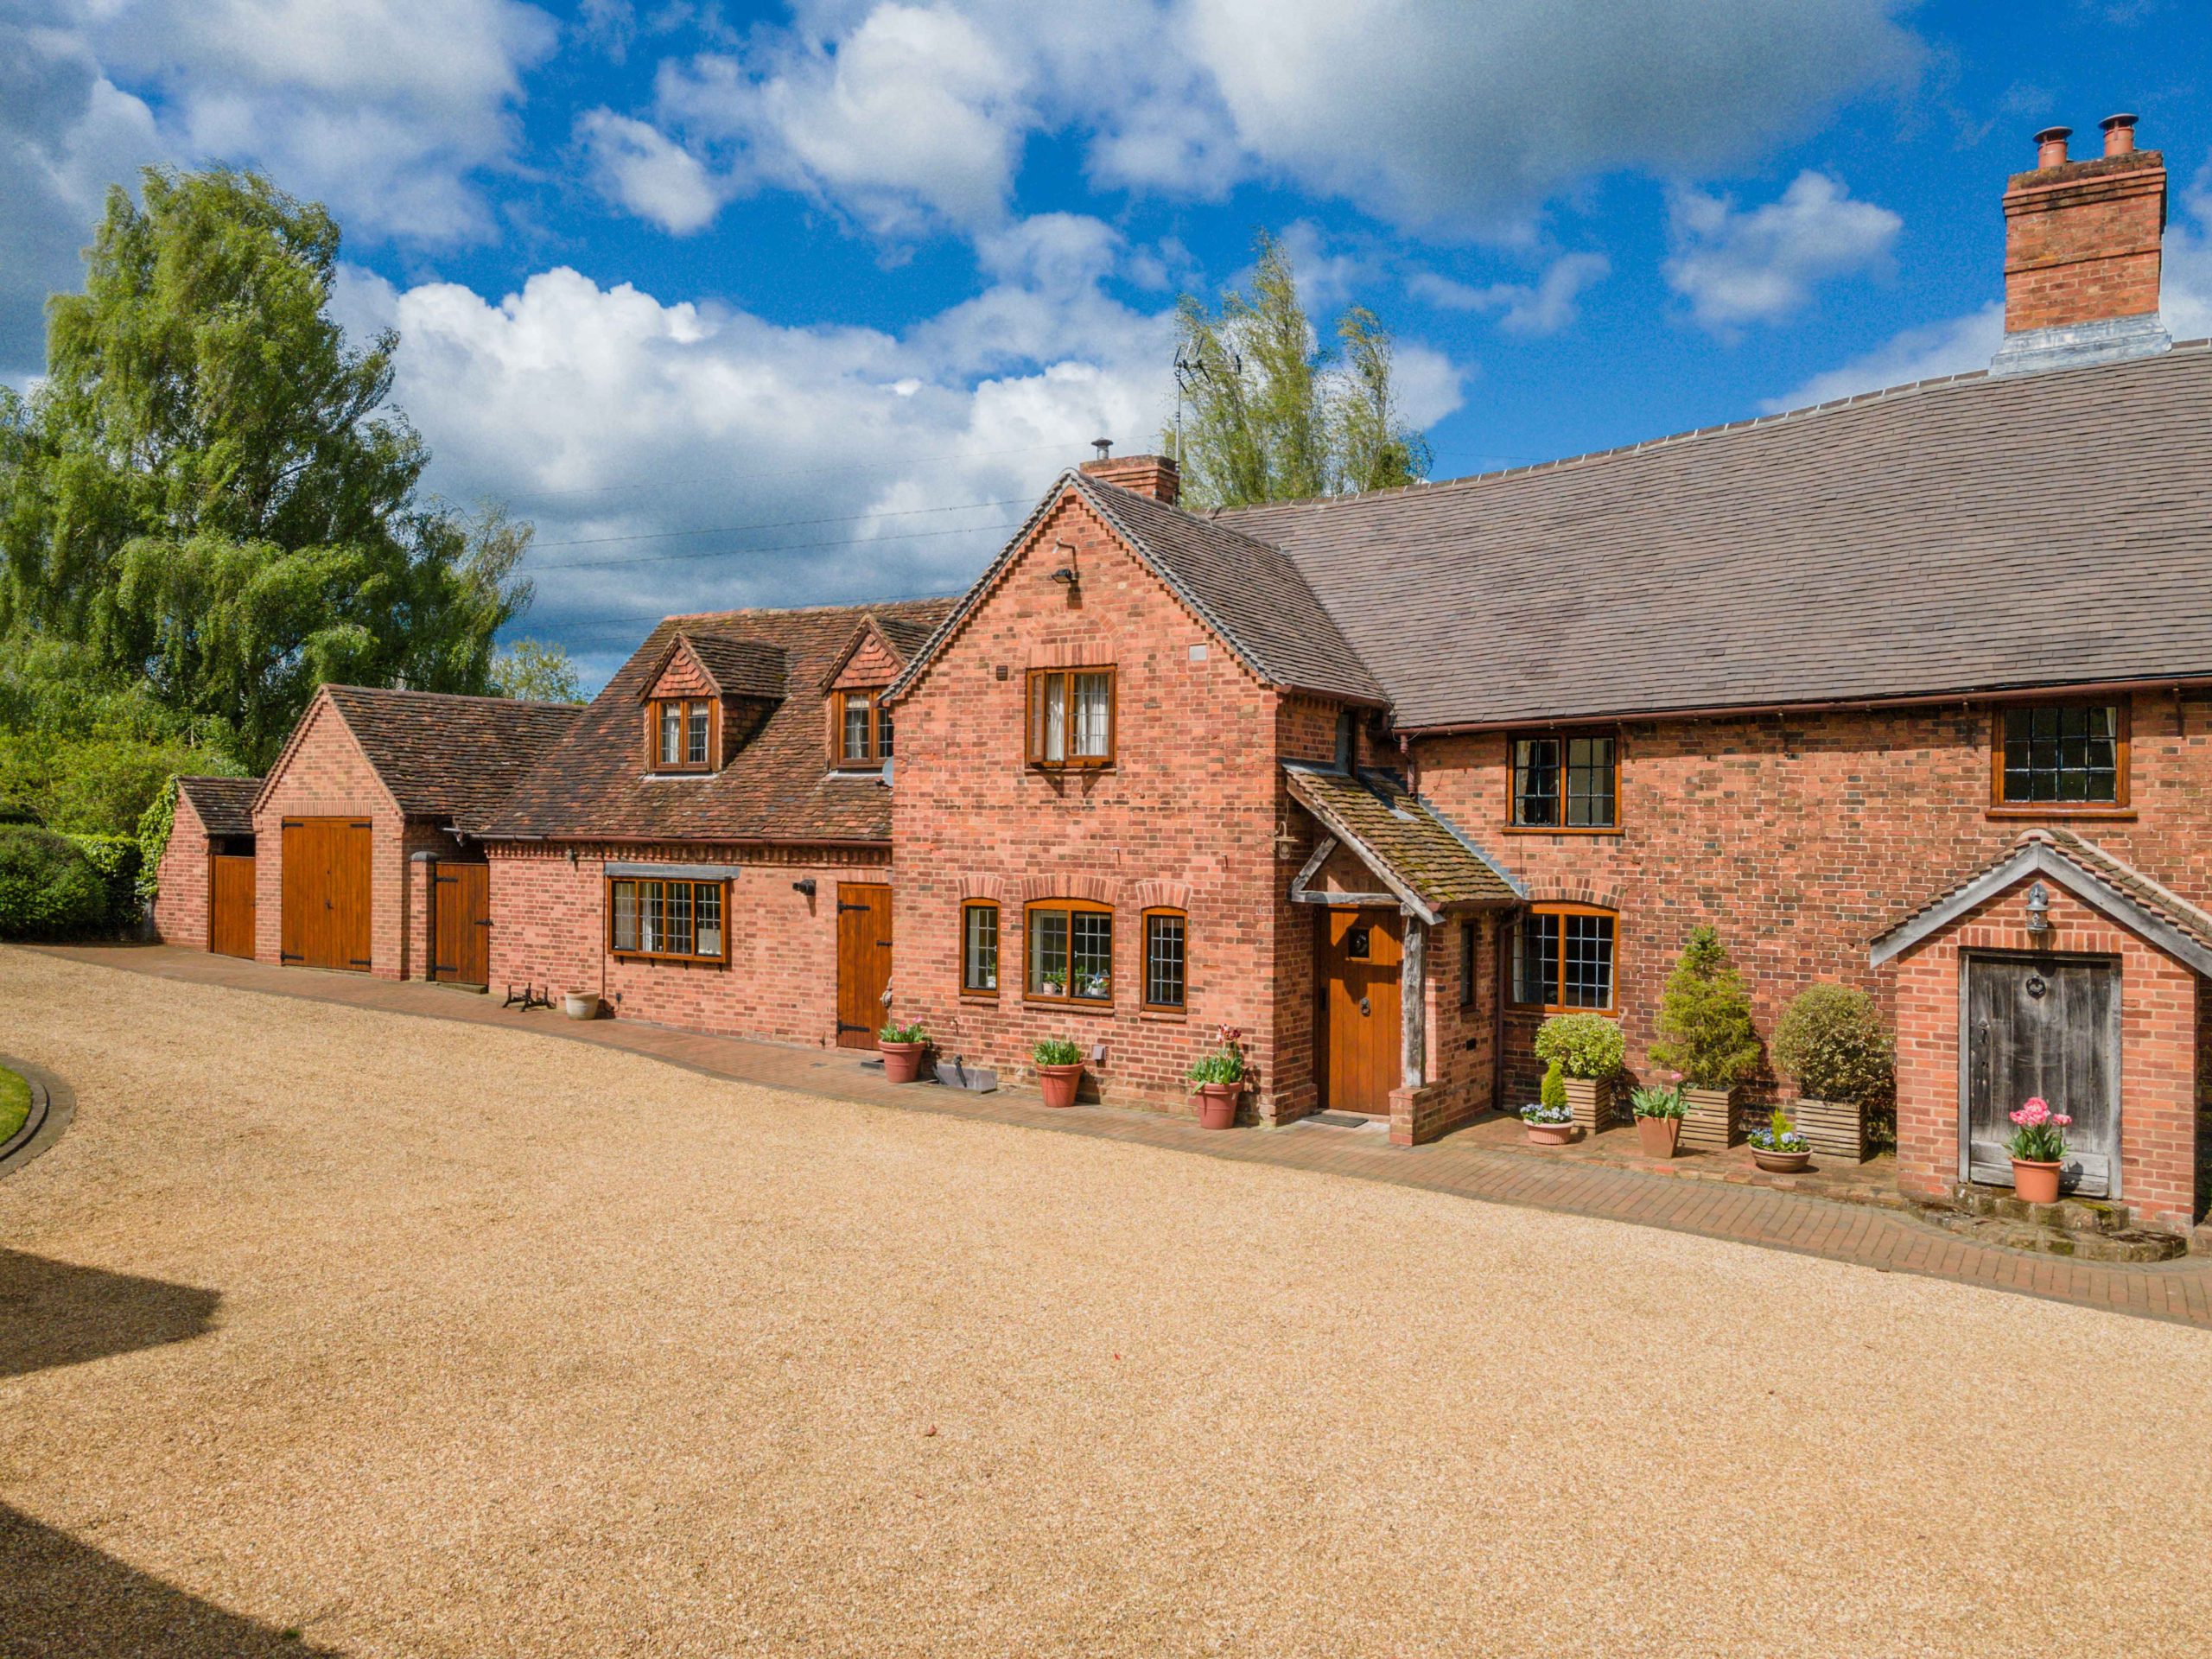 DM Co. Cuttle Pool Farm frontage scaled Fabulous 15th century four bedroom farmhouse near Knowle on market for £1.5 million